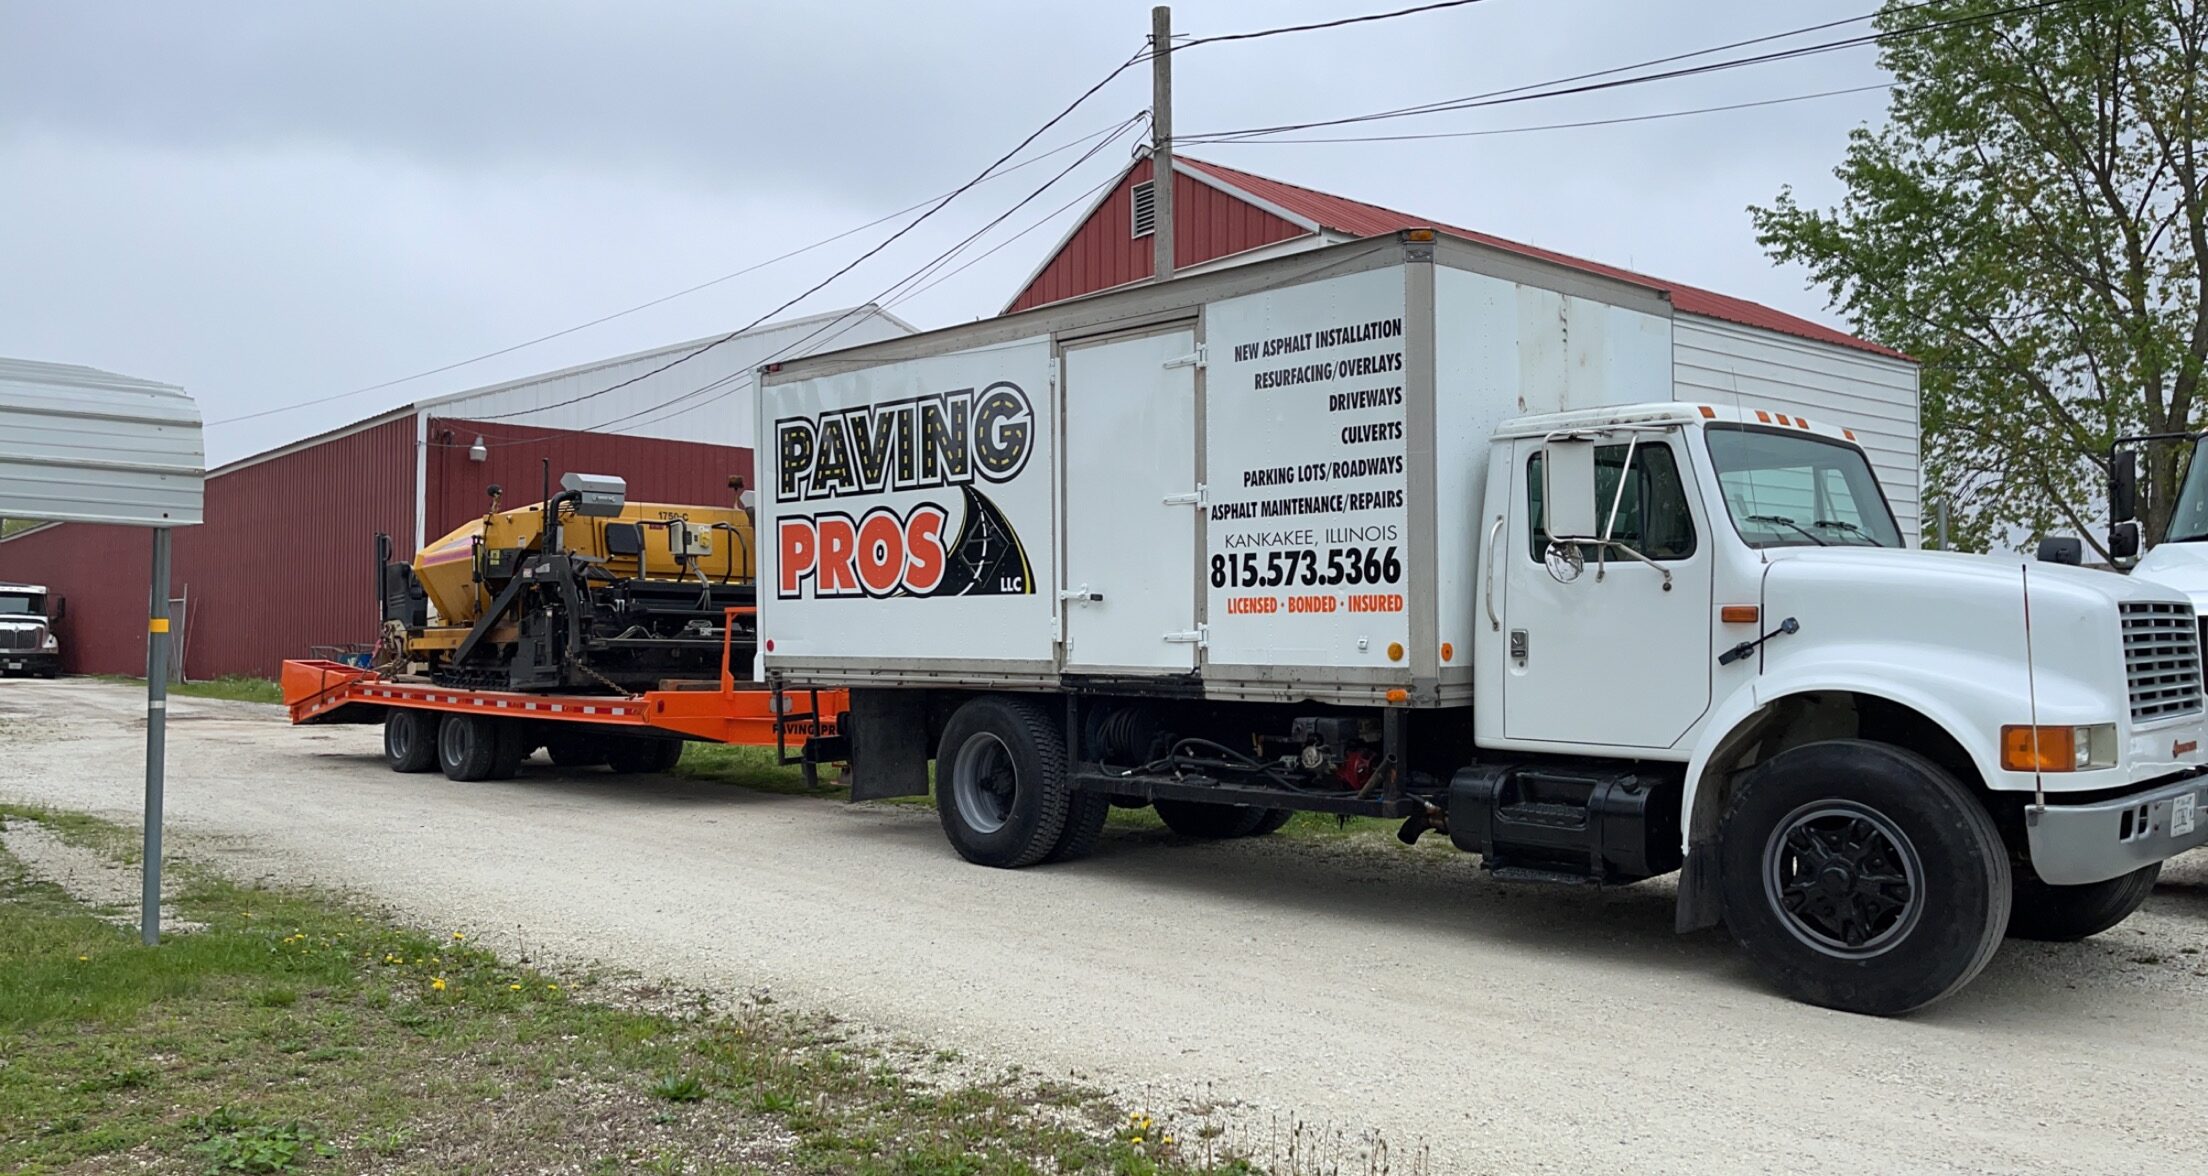 Paving Pros Ready to Tackle Your Paving Project